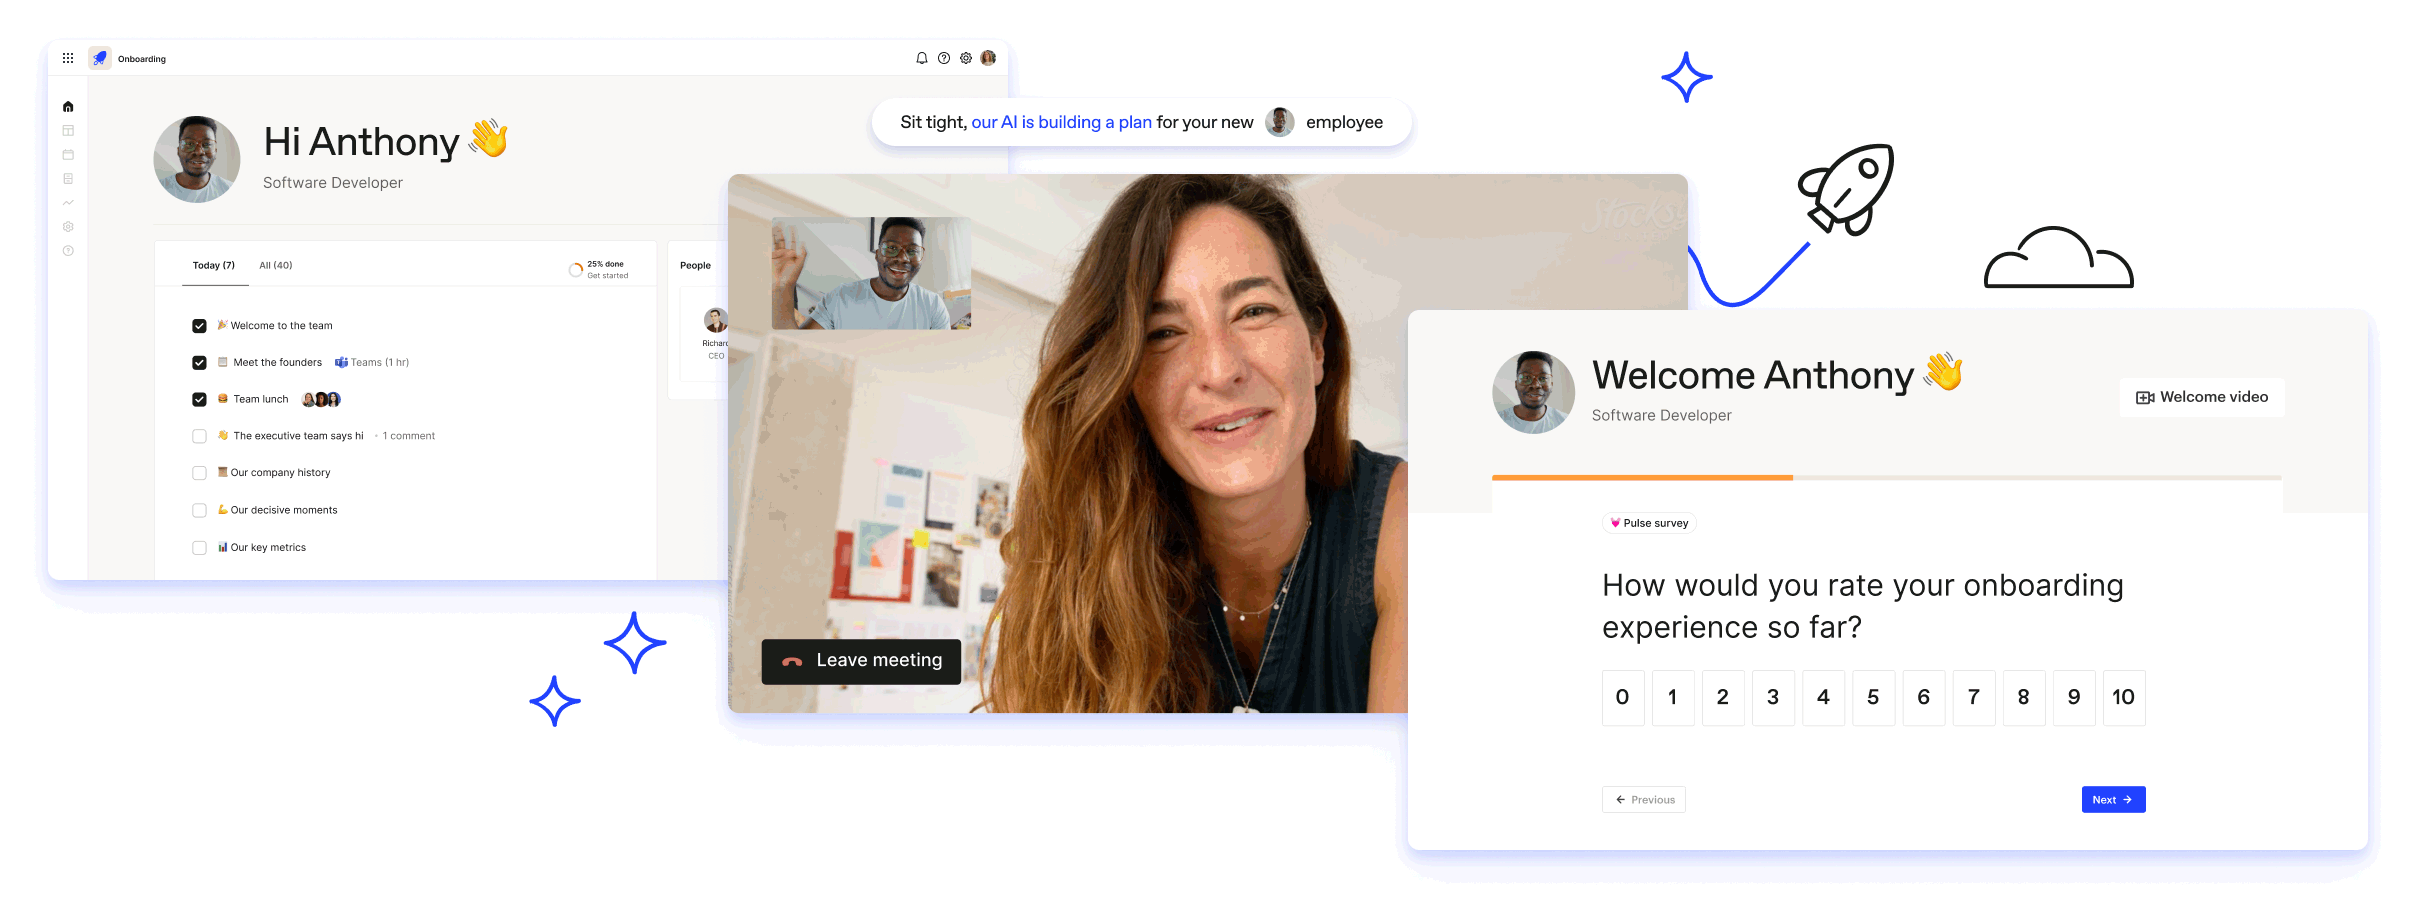 New employee Onboarding made easy! Shows how easy it is to create welcome videos and onboarding plans for new employees.